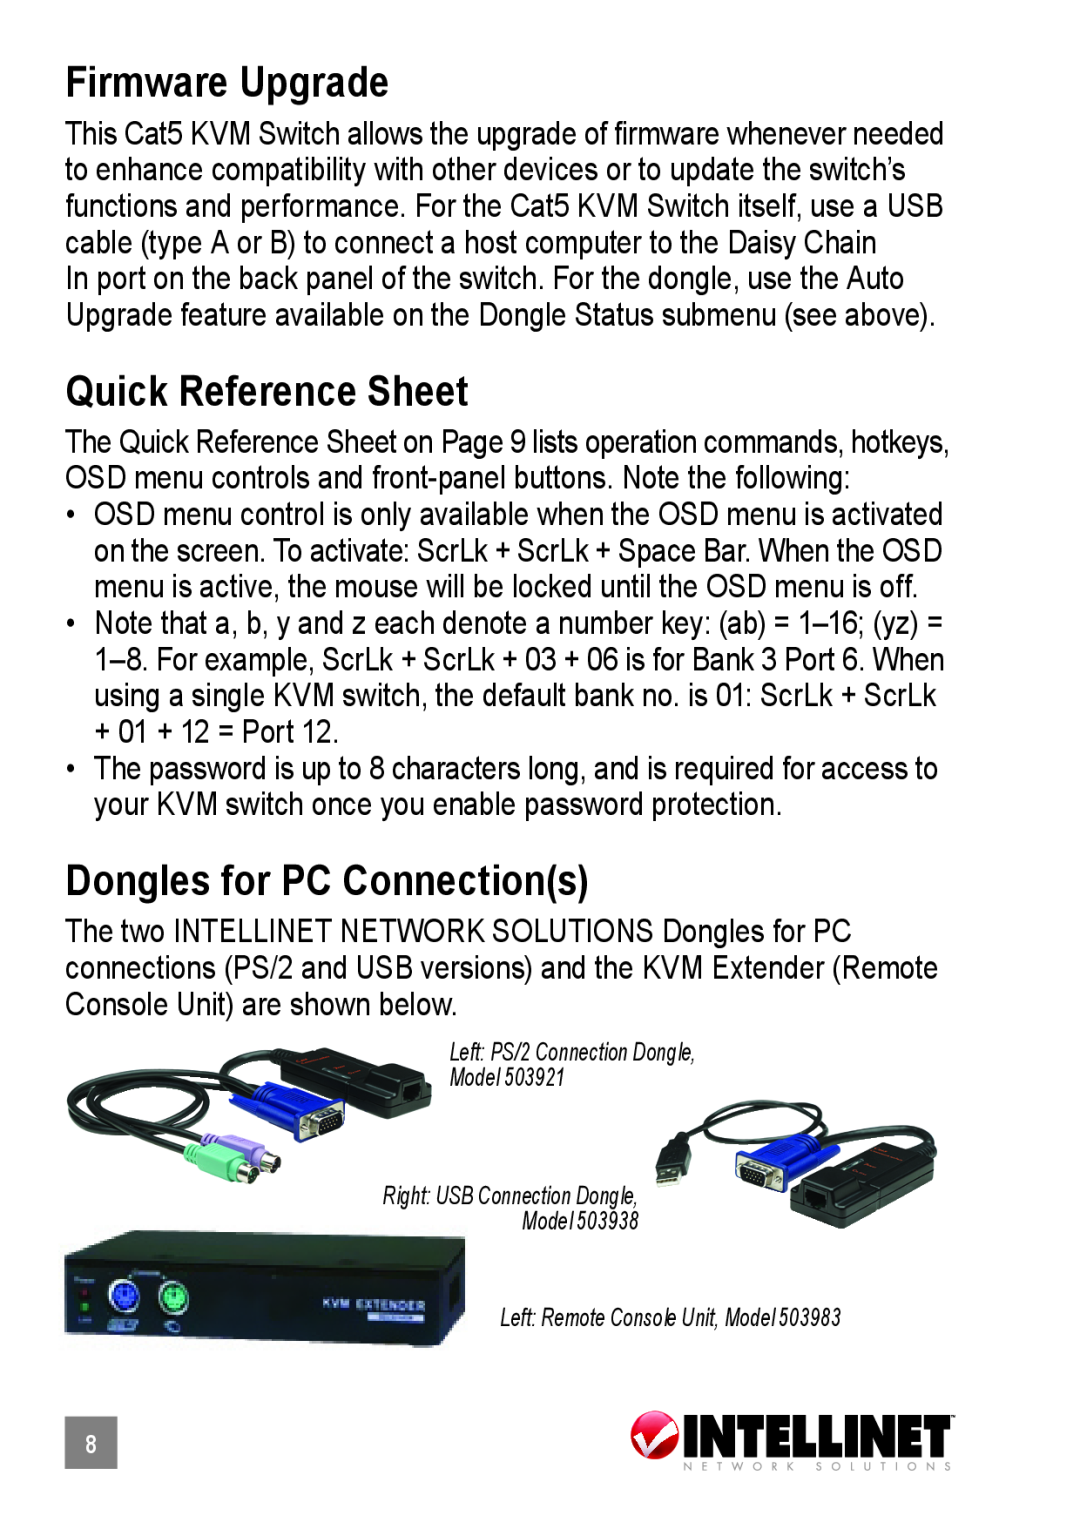 Intellinet Network Solutions 503907, 503914 user manual Firmware Upgrade, Quick Reference Sheet, Dongles for PC Connections 